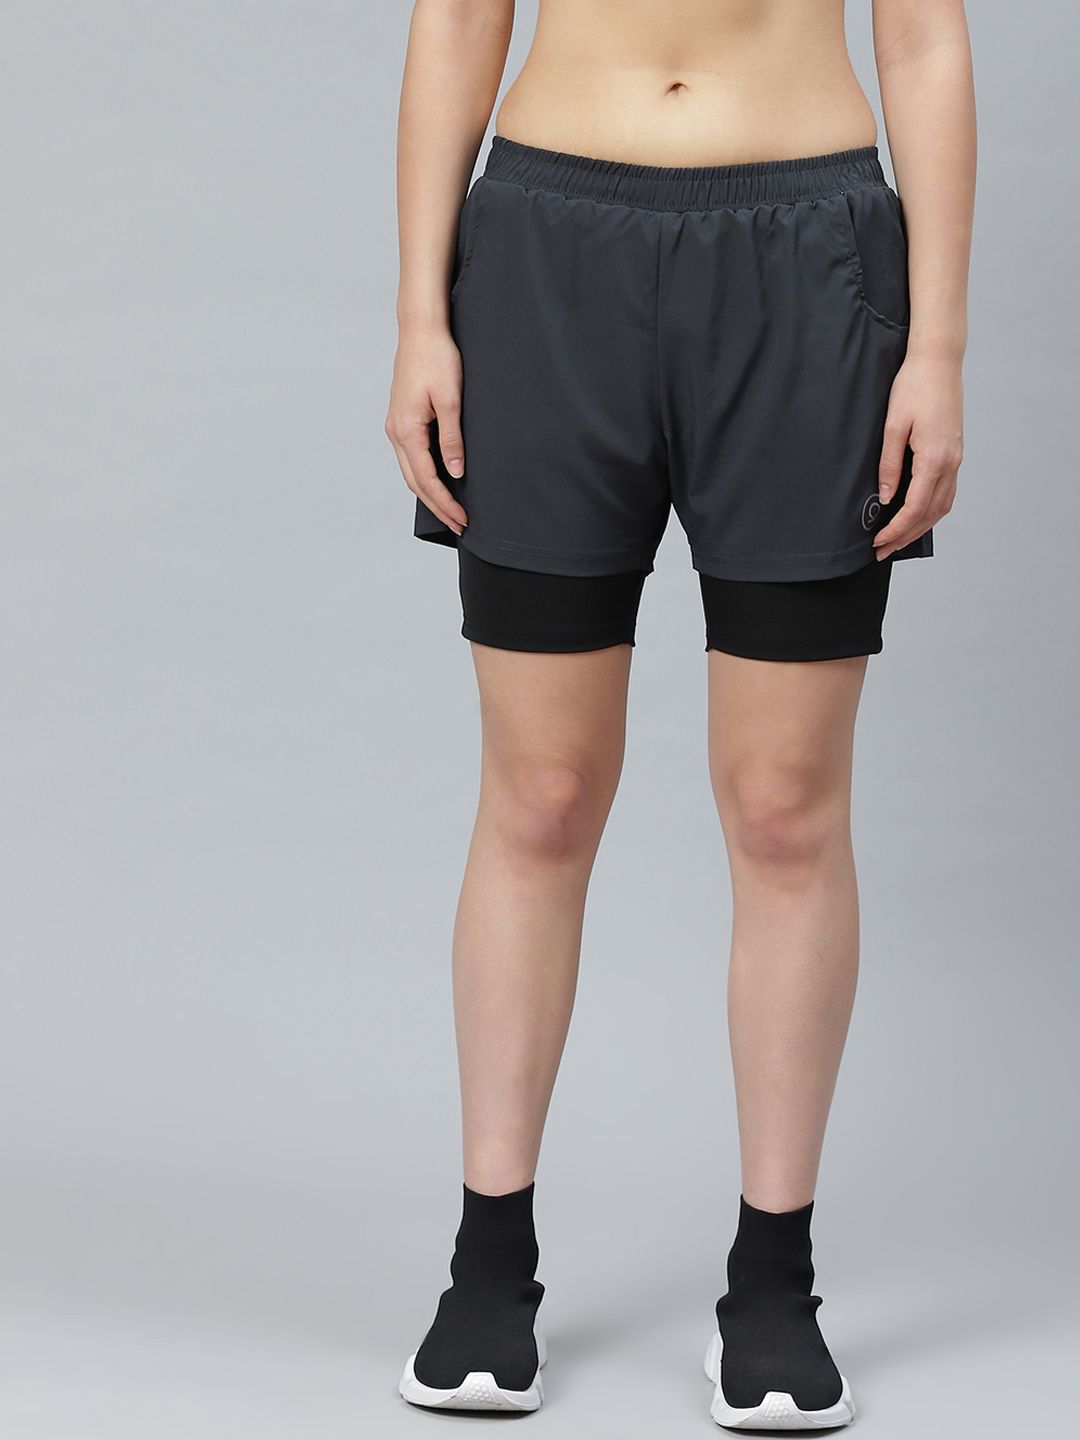 Chkokko Women Charcoal Grey Solid Running Shorts Price in India